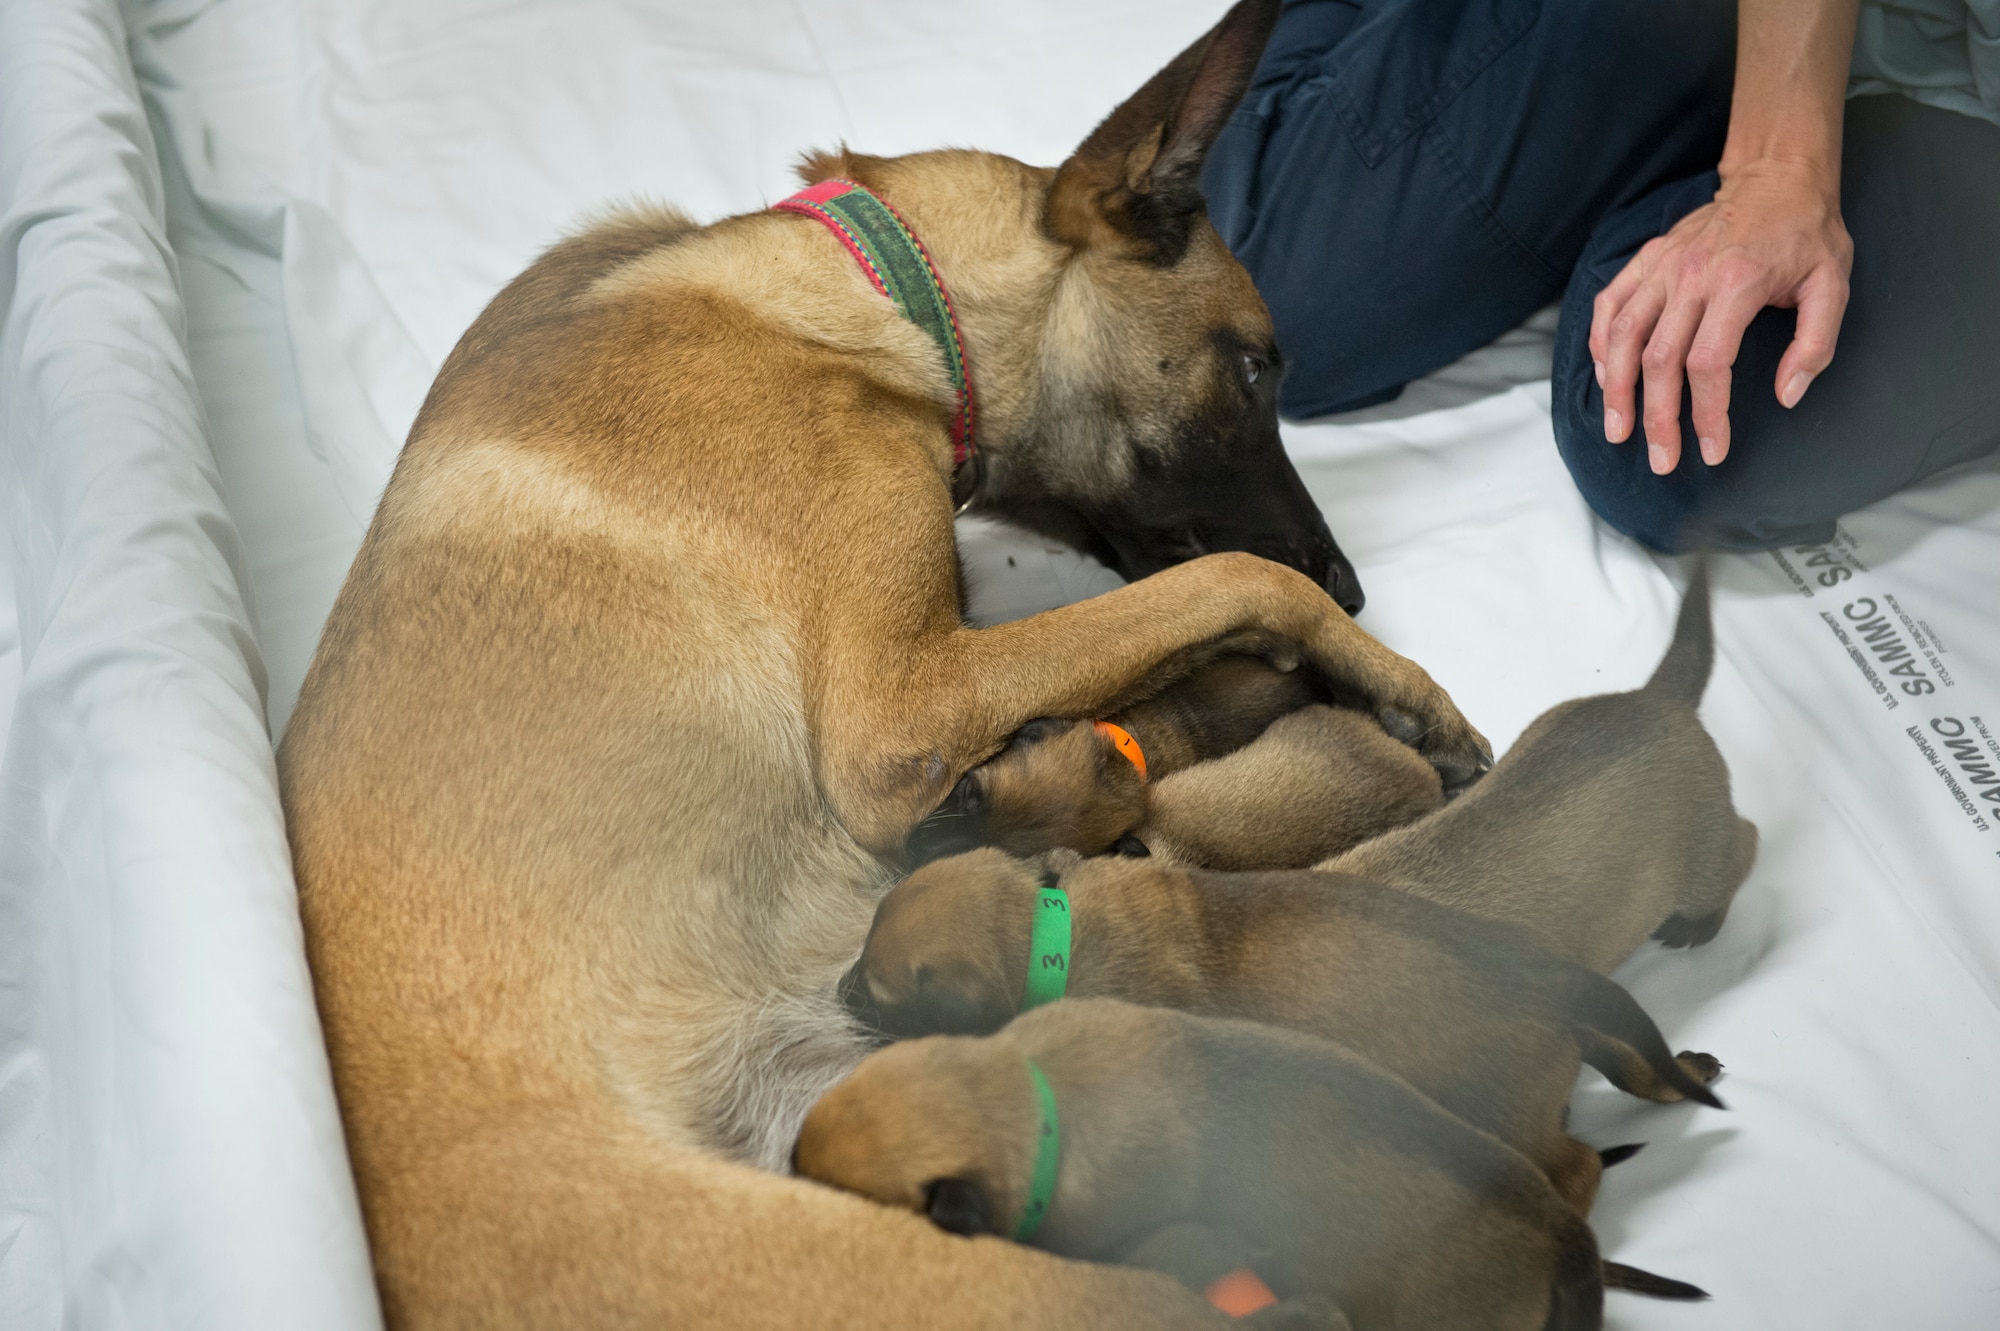 UUkita, a military working dog with the 802nd Security Forces Squadron, feeds her litter of puppies at Joint Base San Antonio-Lackland, Texas. UUkita, gave birth to eight Belgian-bred Malinois puppies. The puppies will be kept in a secure location to prevent sickness before training the dogs for military work. When the dogs are mature enough to train, they will filter through a selection process to determine which dogs are qualified for military work. (U.S. Air force photo/Staff Sgt. Vernon Young Jr.)